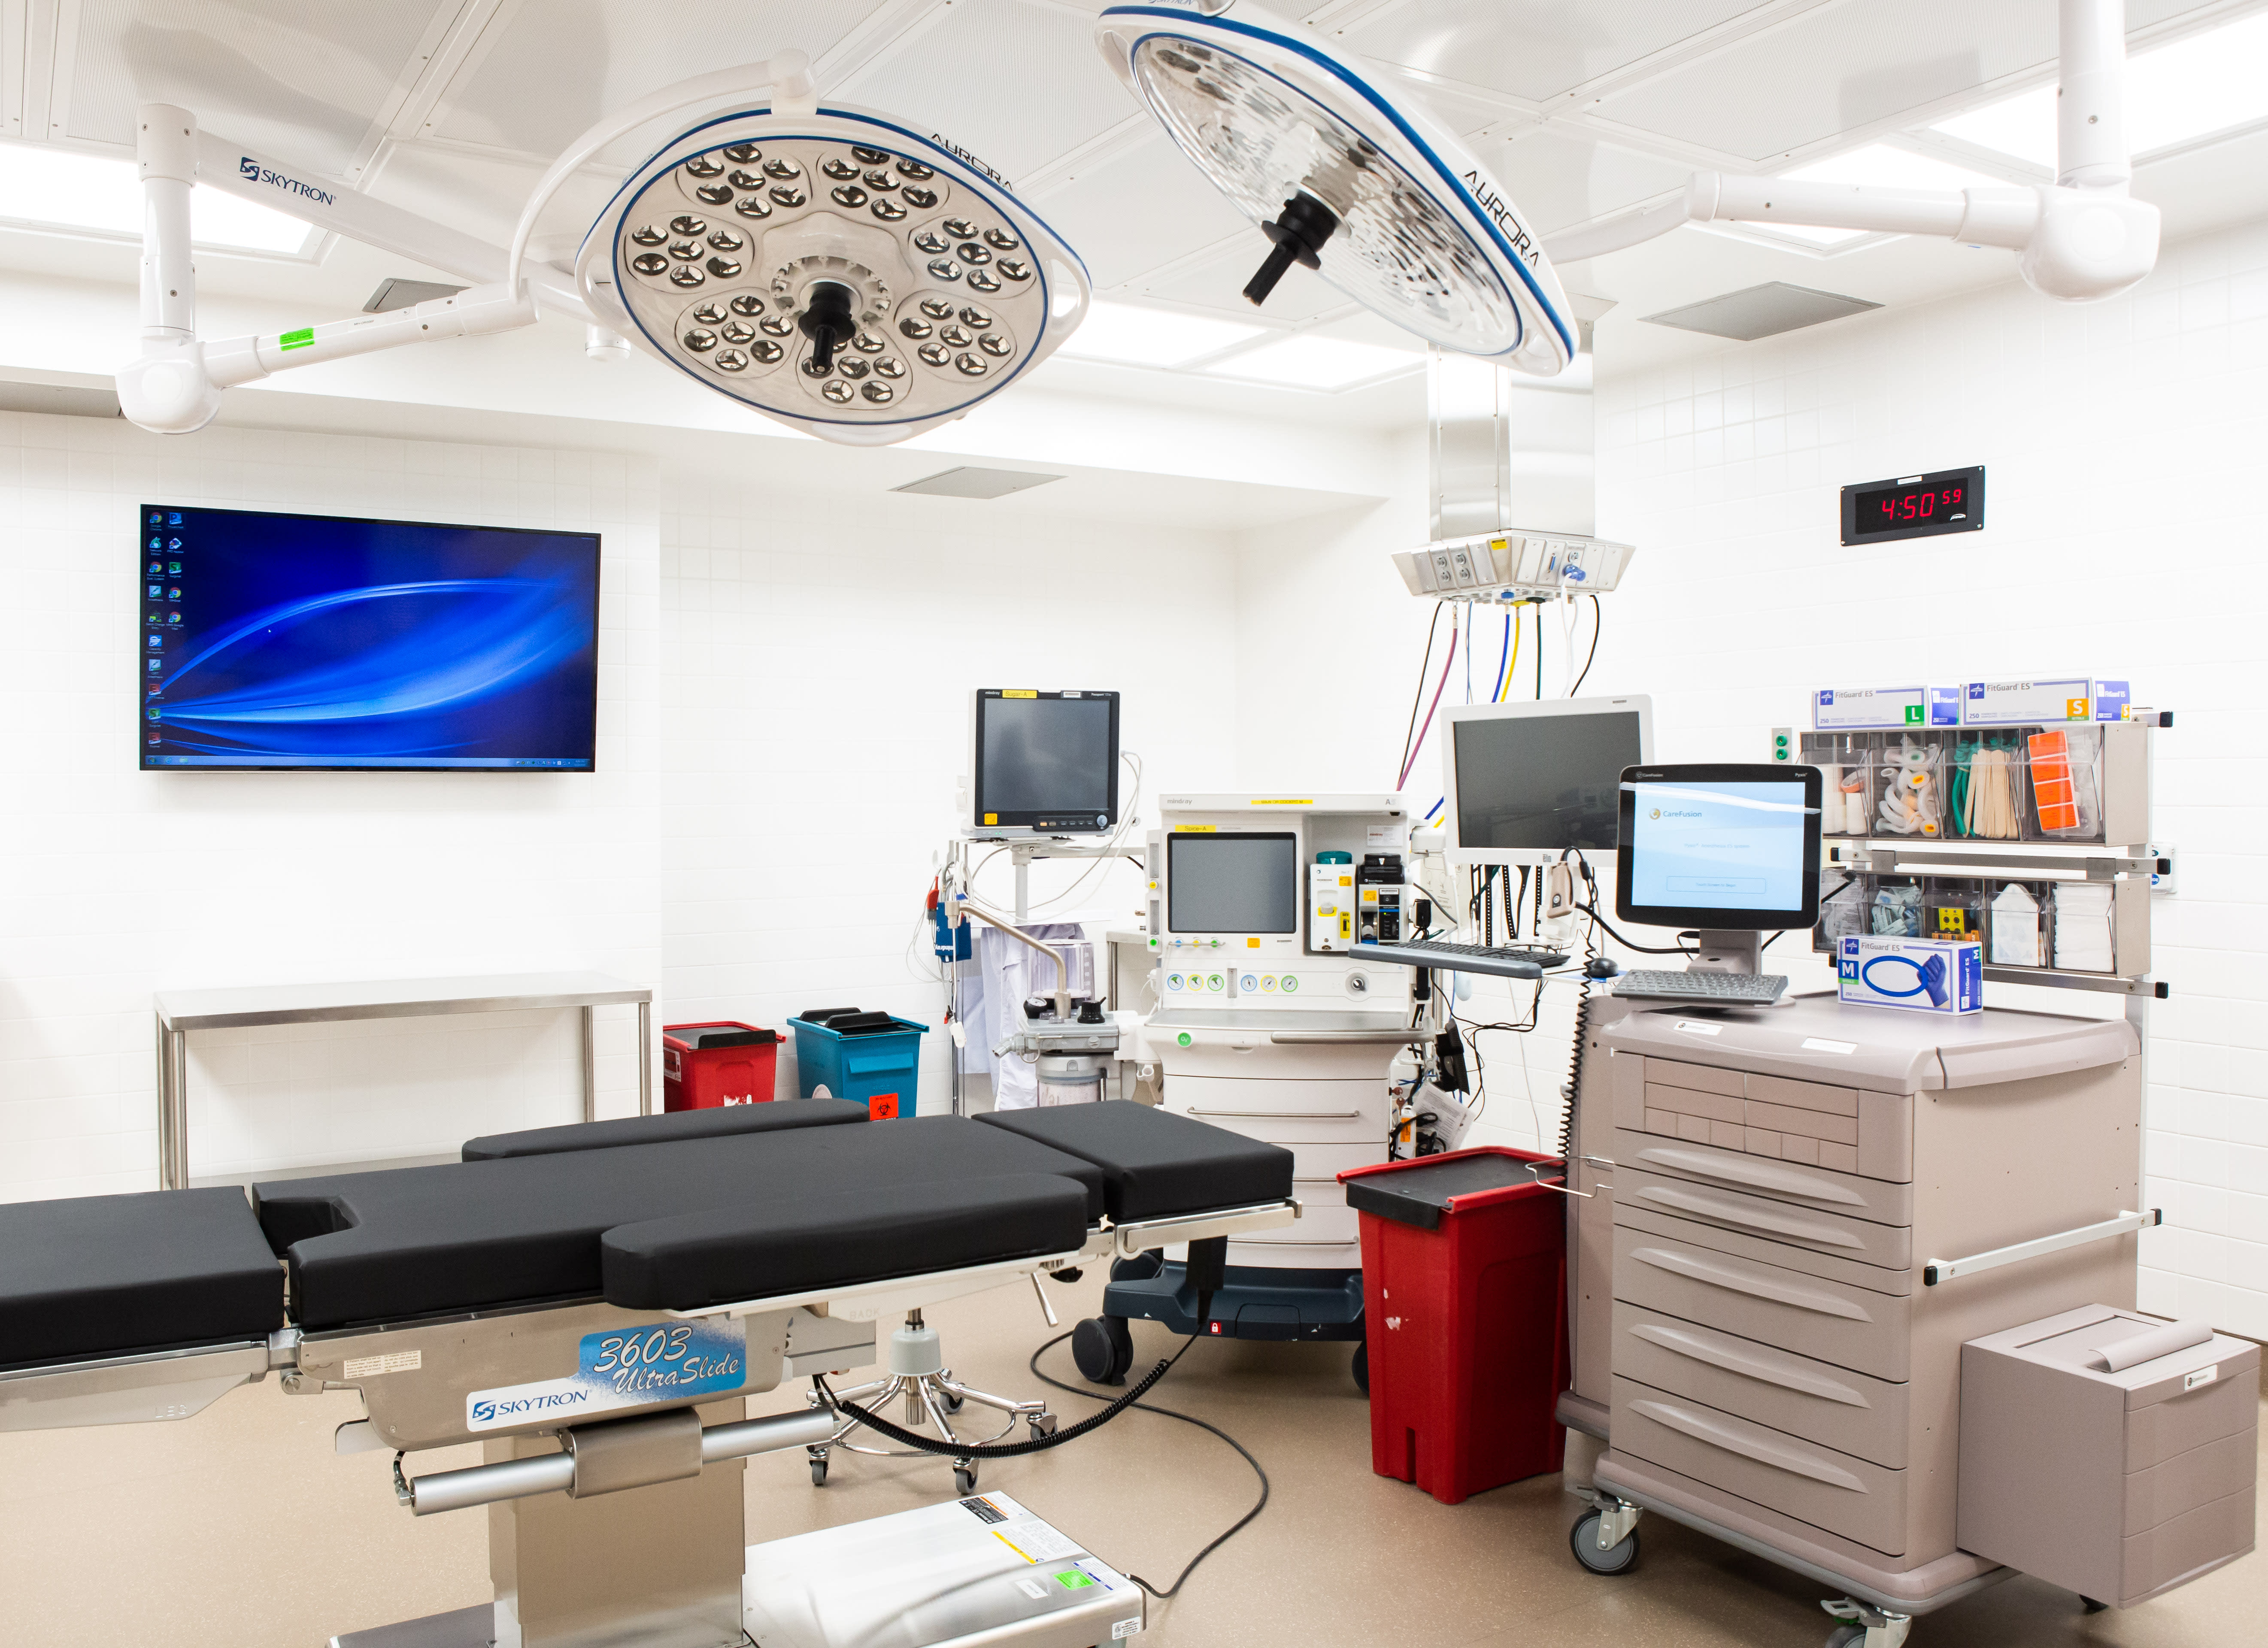 High-tech orthopedic operating suite at Middlesex Hospital.